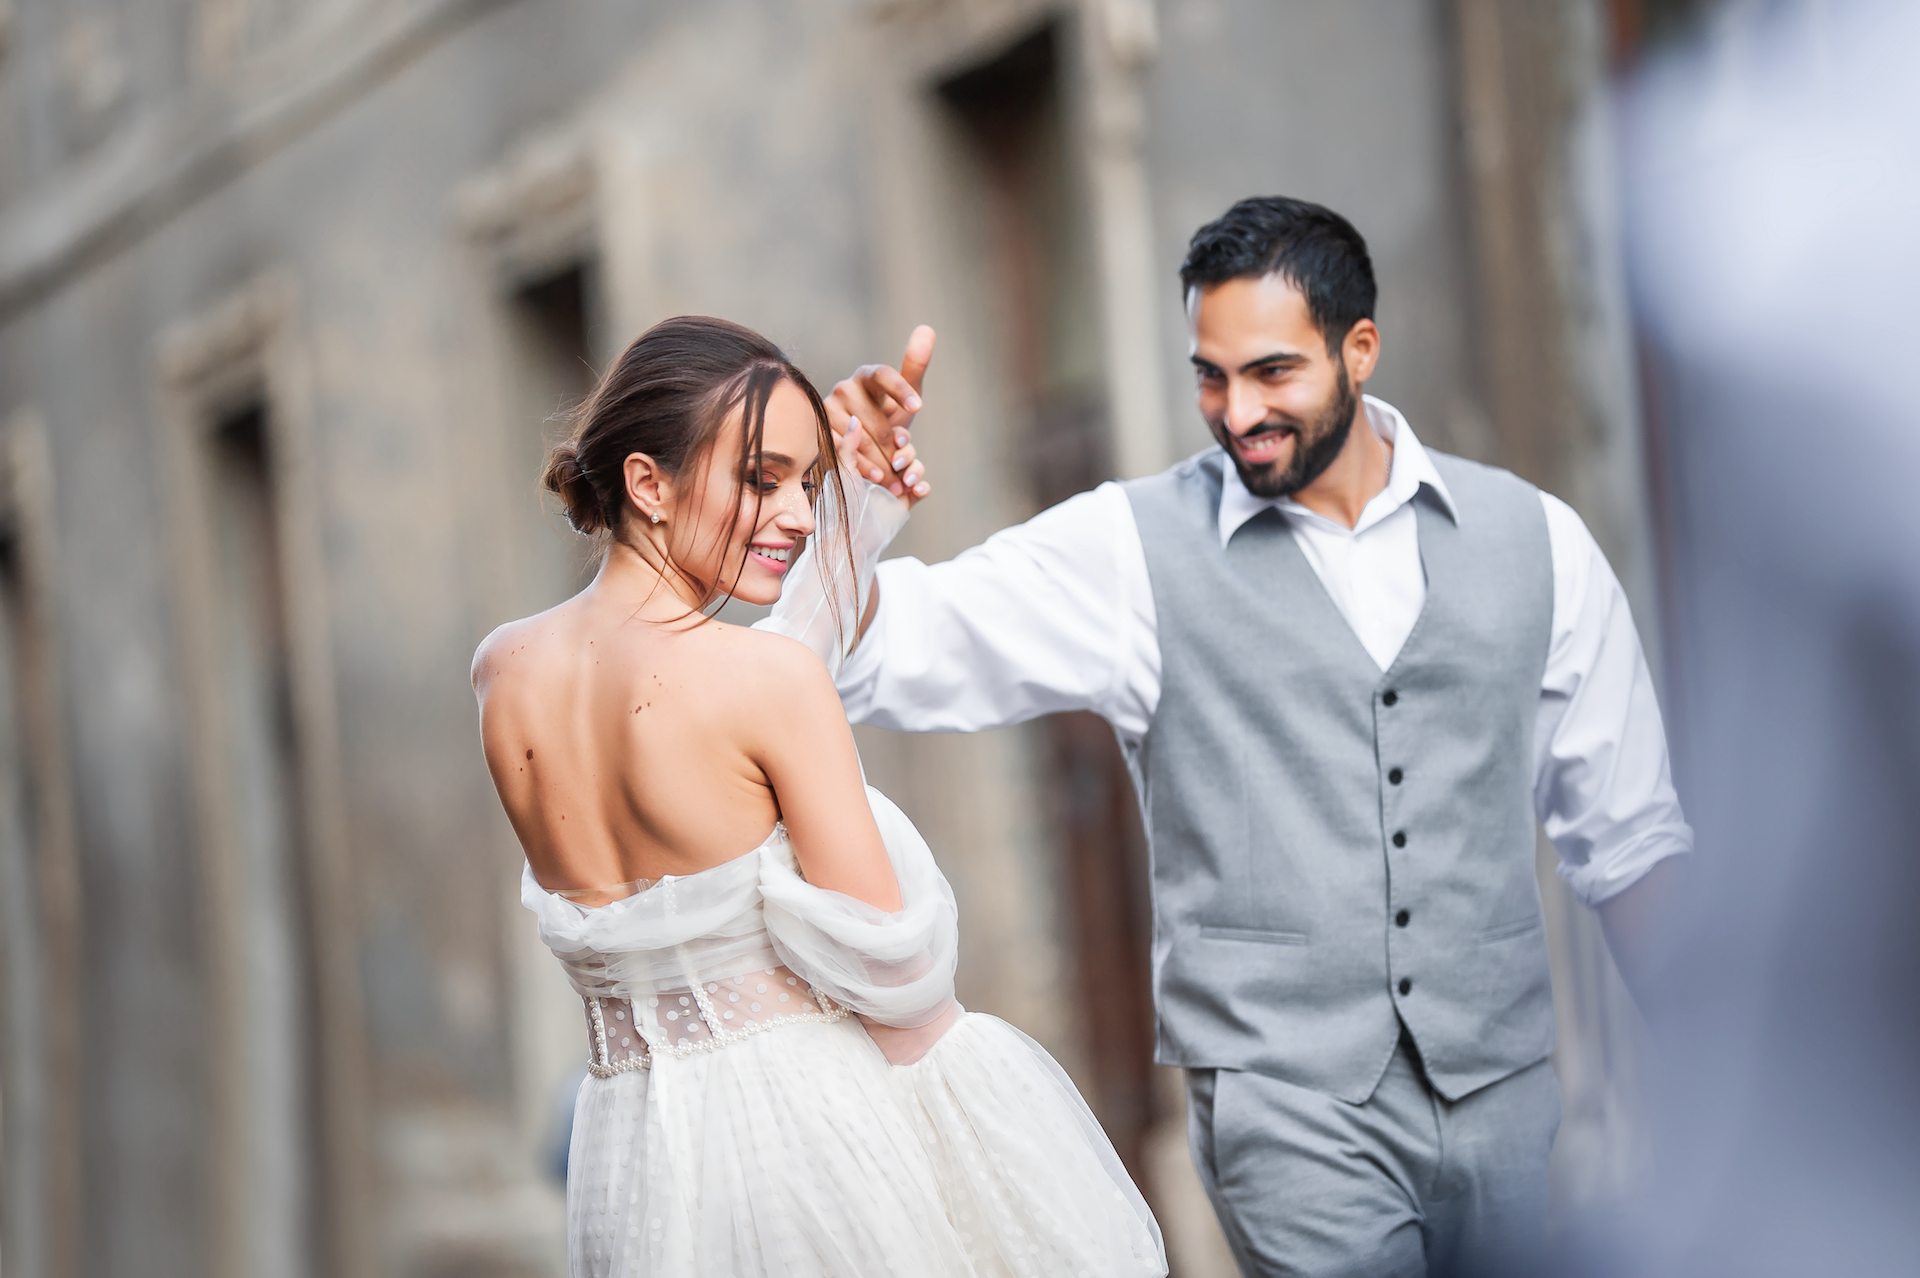 A bride and groom dancing after their wedding for the bella mansions blog 2023 wedding trends